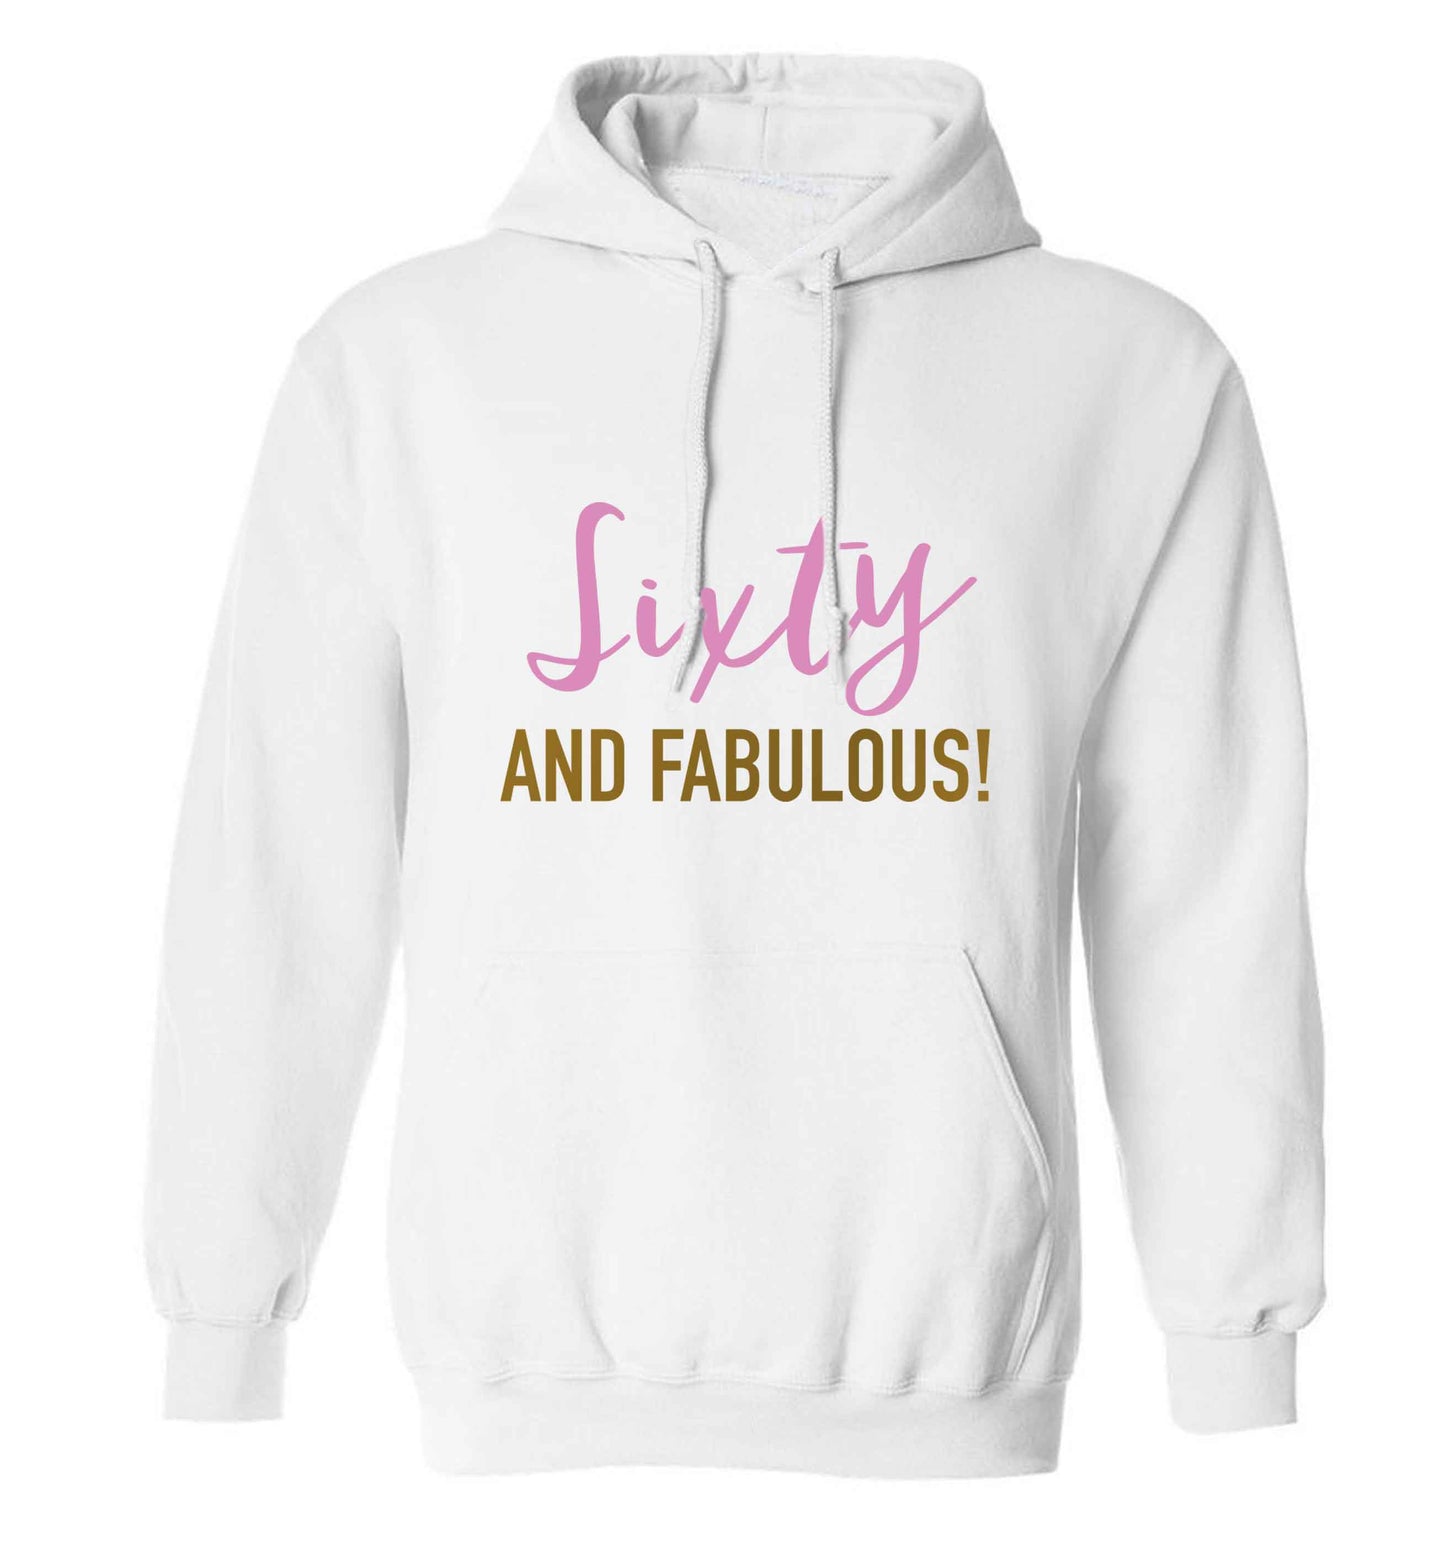 Sixty and fabulous adults unisex white hoodie 2XL